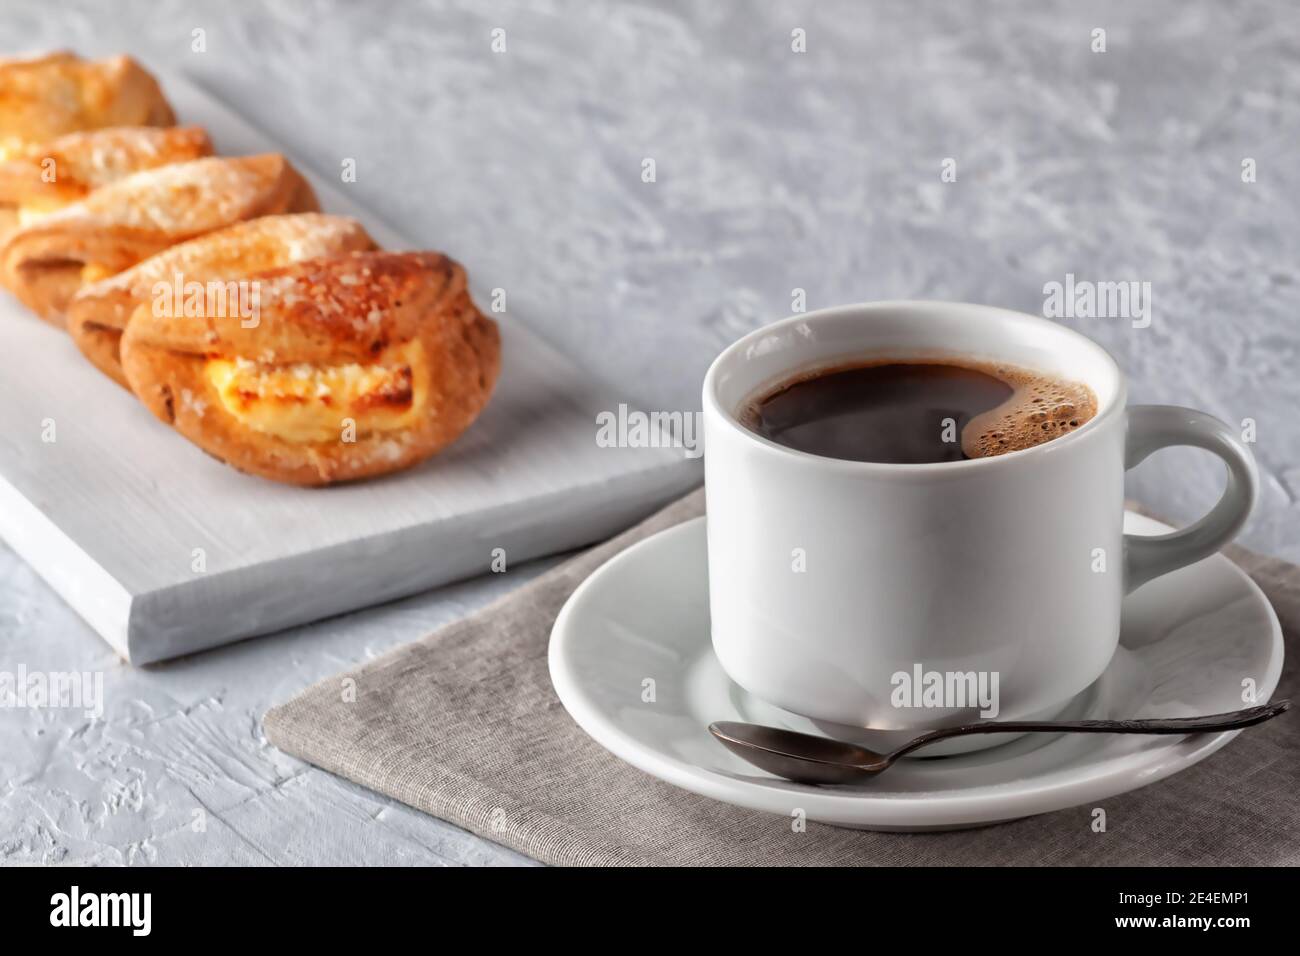 Homemade cakes, cup of coffee and homemade cookies with cottage cheese on gray background Stock Photo